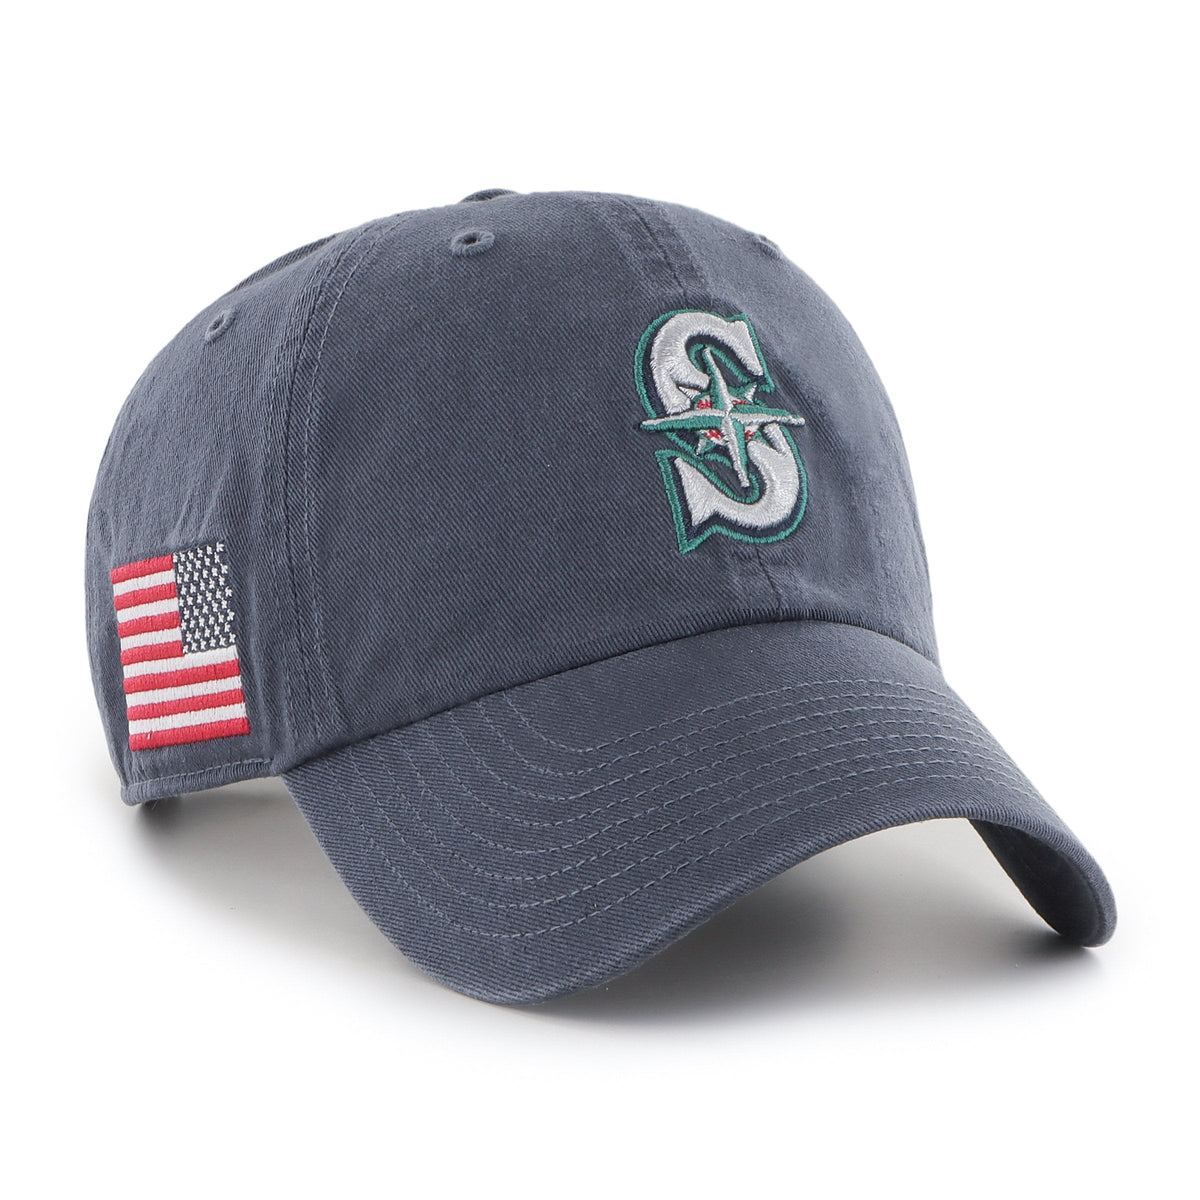 SEATTLE MARINERS HERITAGE '47 CLEAN UP